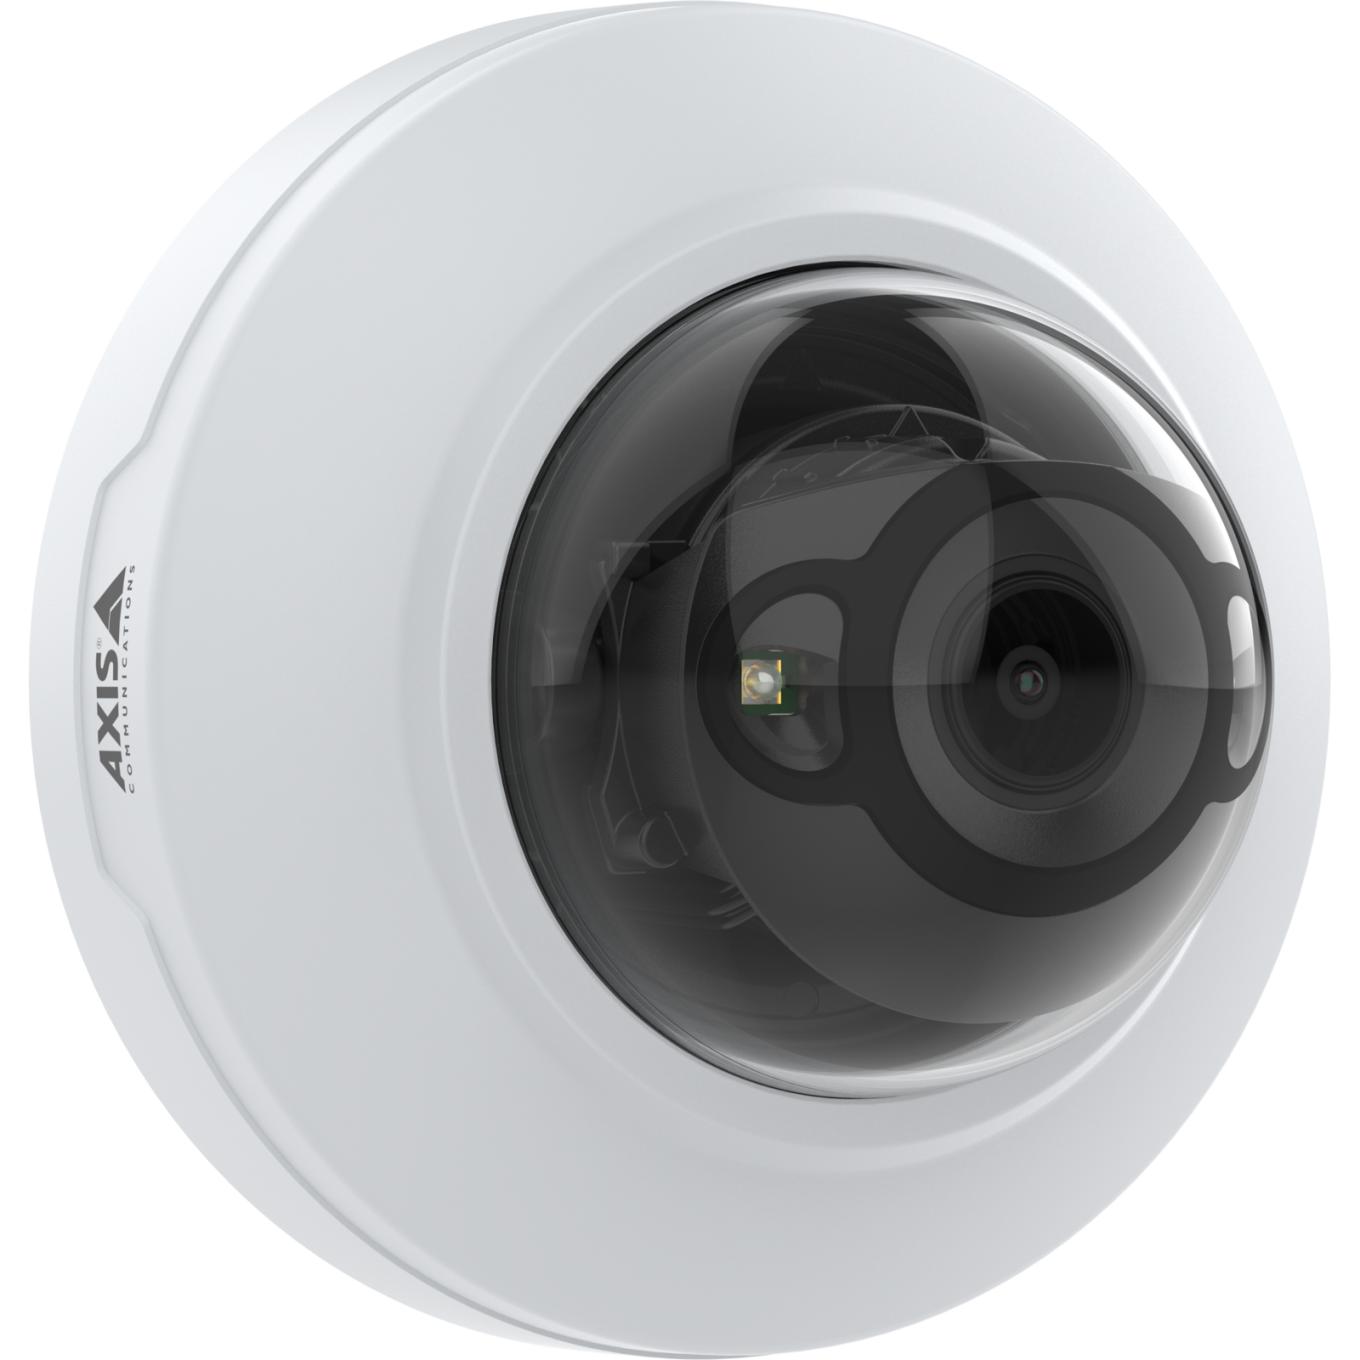 AXIS M4216-LV Dome Camera | Axis Communications